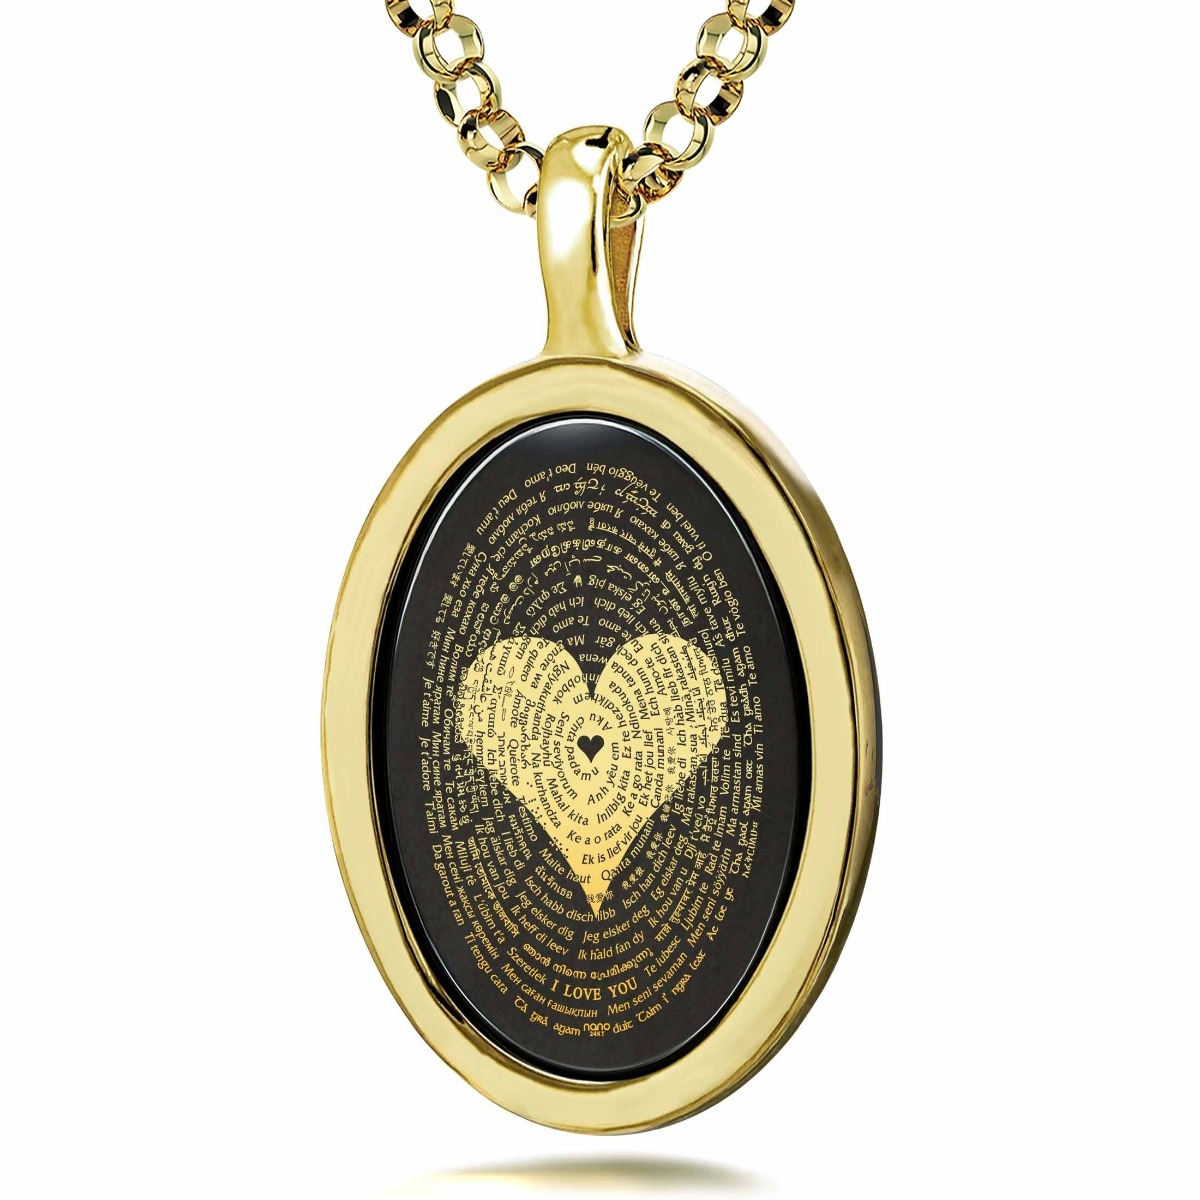 Nano 14K Gold and Onyx Framed Oval Necklace with 24K Gold Heart and “I Love You” in 120 Languages Micro-Inscription - 1